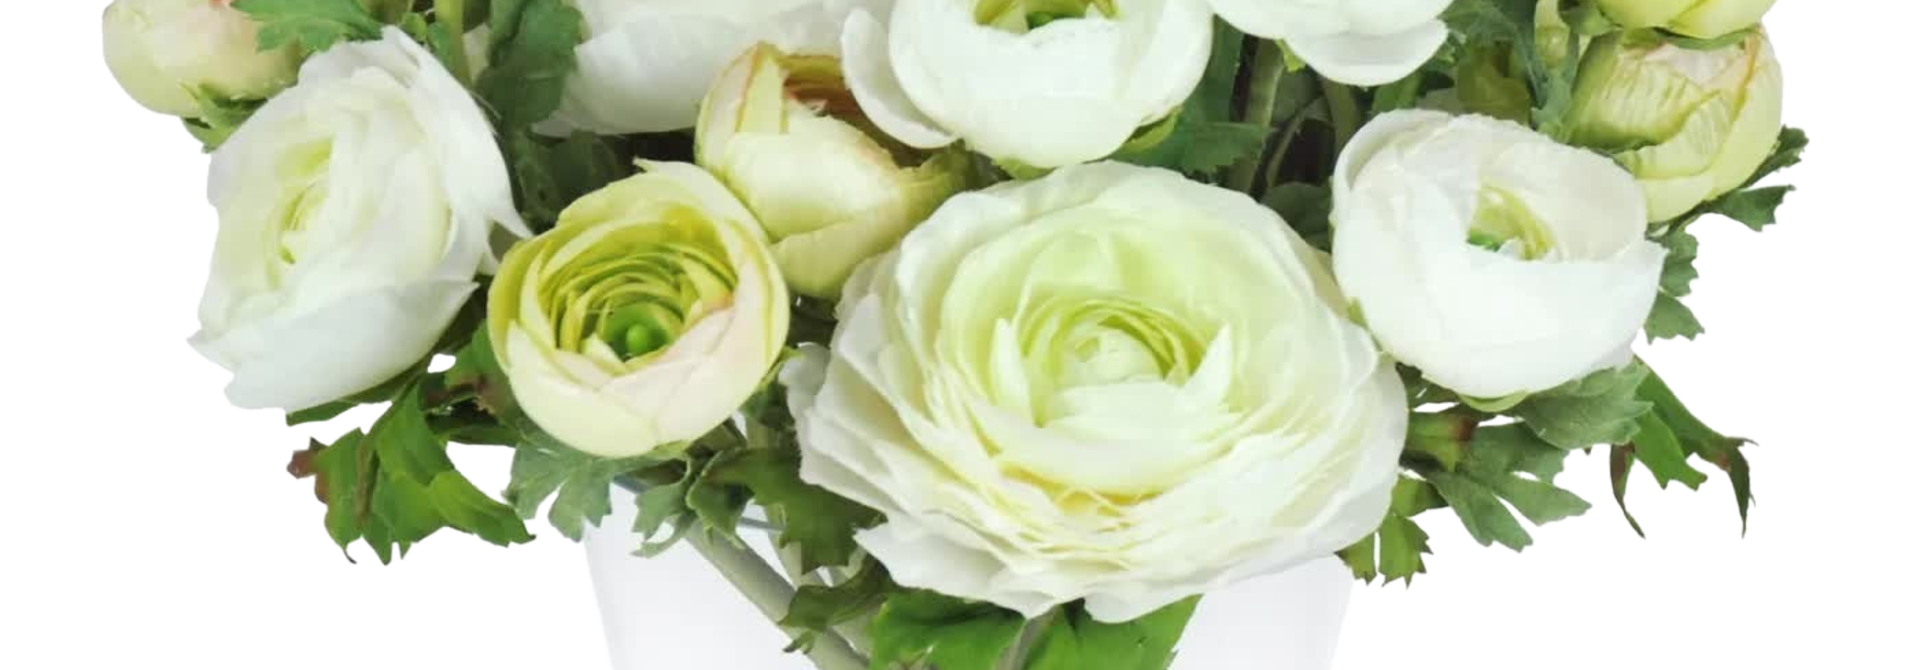 Ranunculus in Round Glass | The Floral Arrangement Collection, White - 10 Inch x 10 Inch x 10 Inch